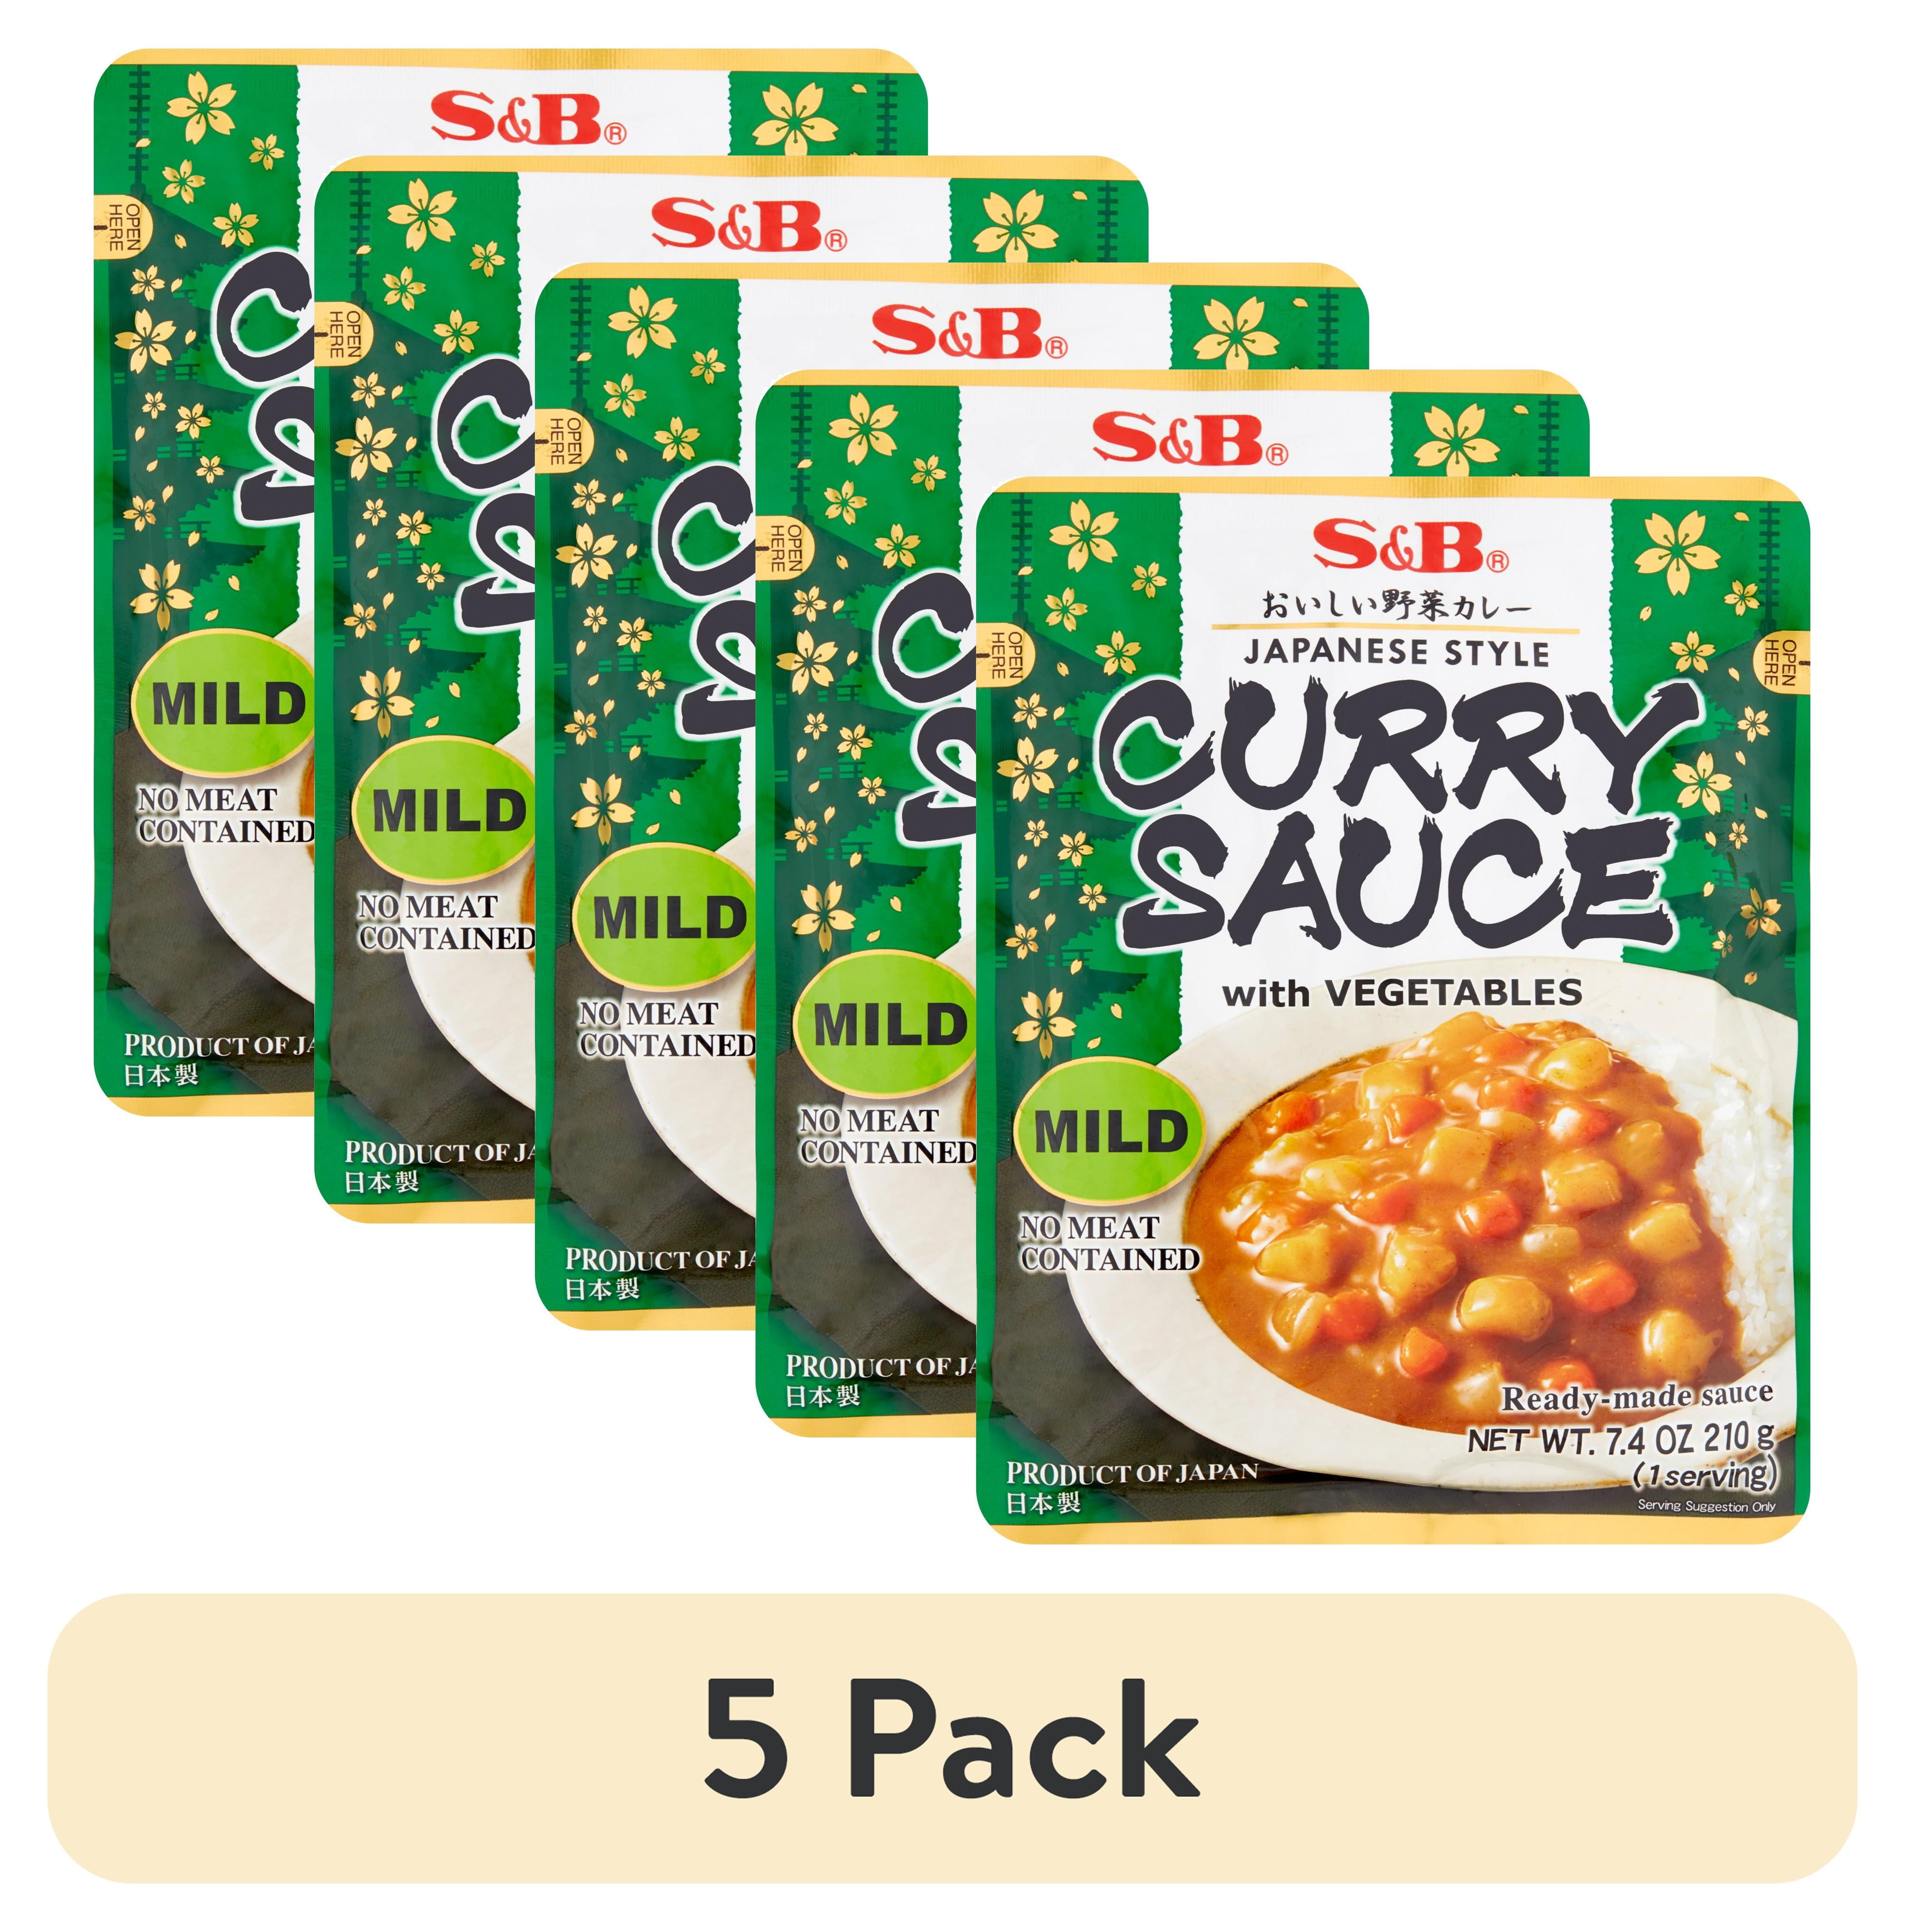 pack) Curry S&B Vegetables, 7.4 Mil RETORT, with Oz Style 5 Sauce Japanese